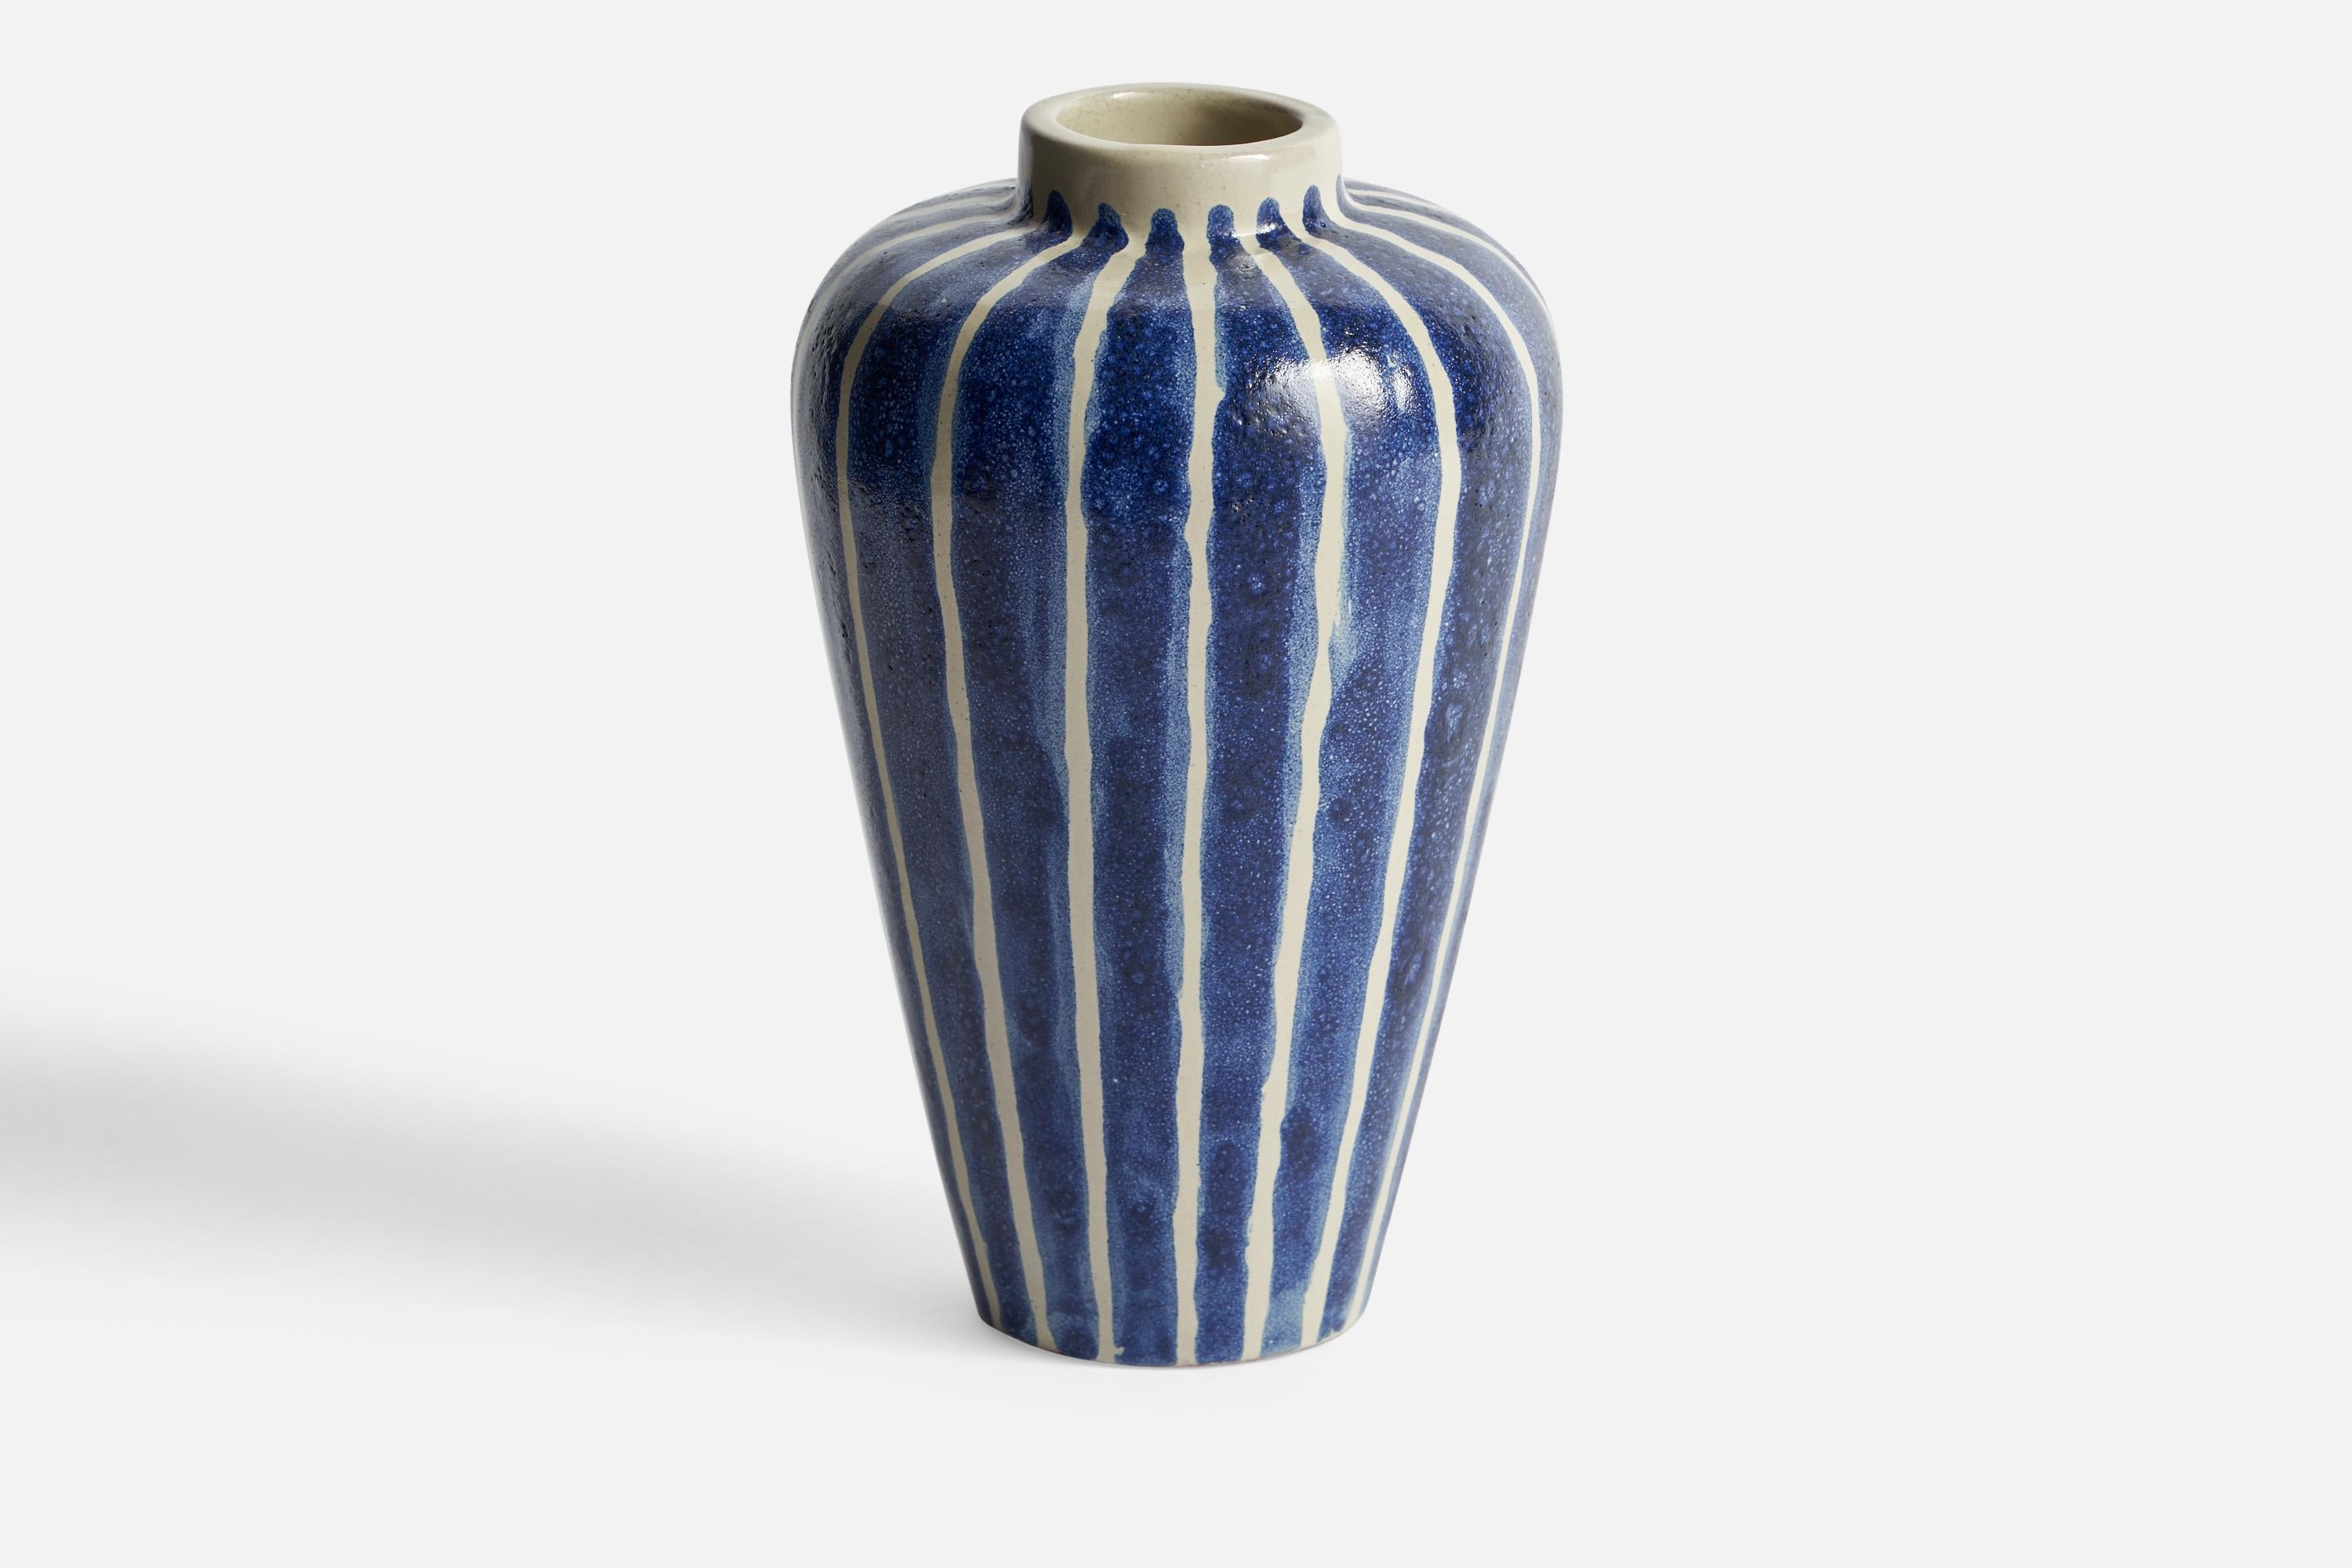 A hand-painted blue and white earthenware vase by Upsala Ekeby, Sweden, 1950s.